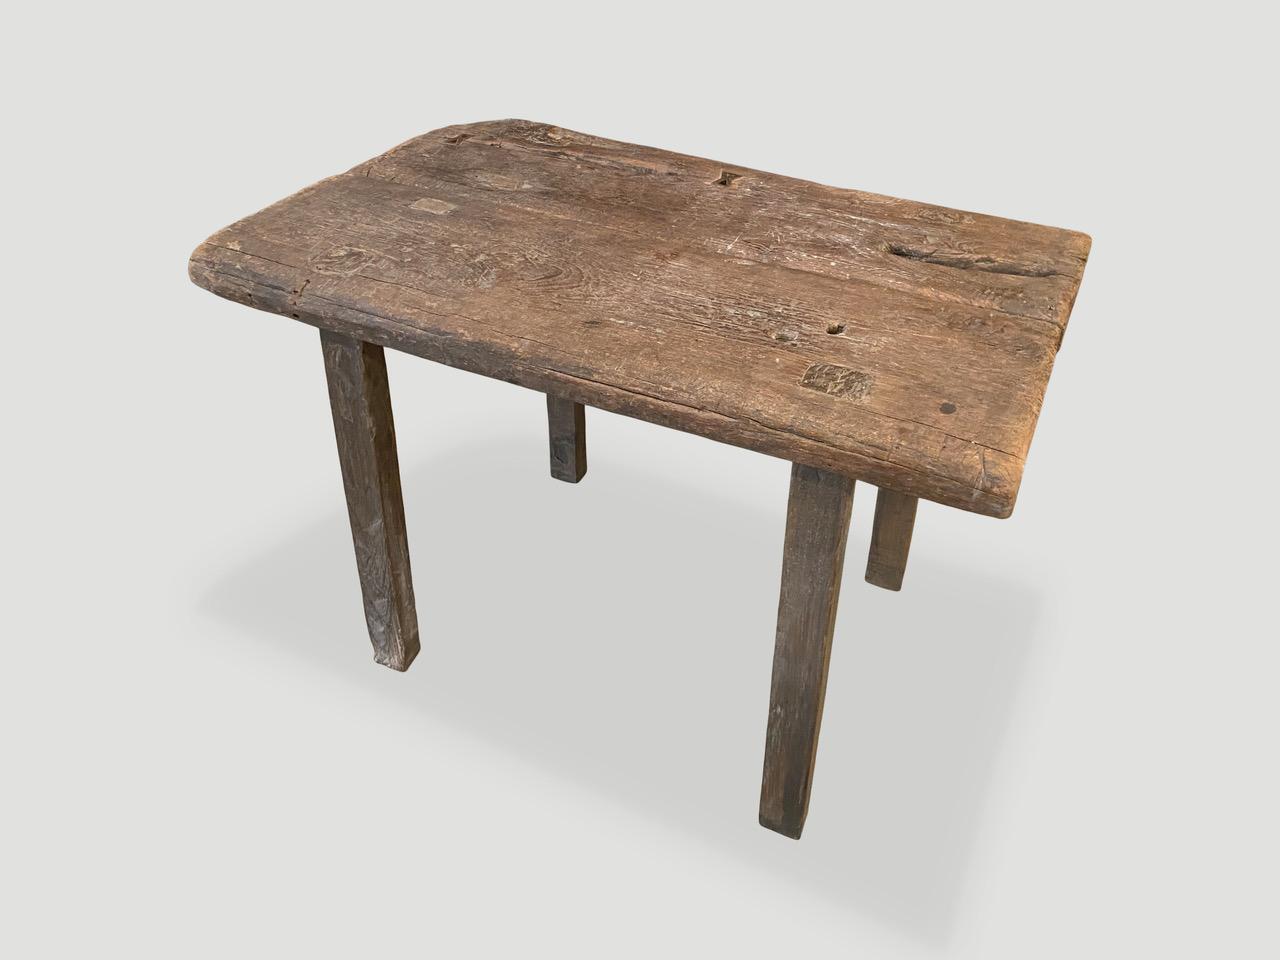 Antique hand carved Wabi Sabi side table or small console table. We cut a single thick panel of teak and joined them together and added butterfly detail to the top. Beautiful soft rounded edges on this two inch thick, aged teak wood, celebrating the